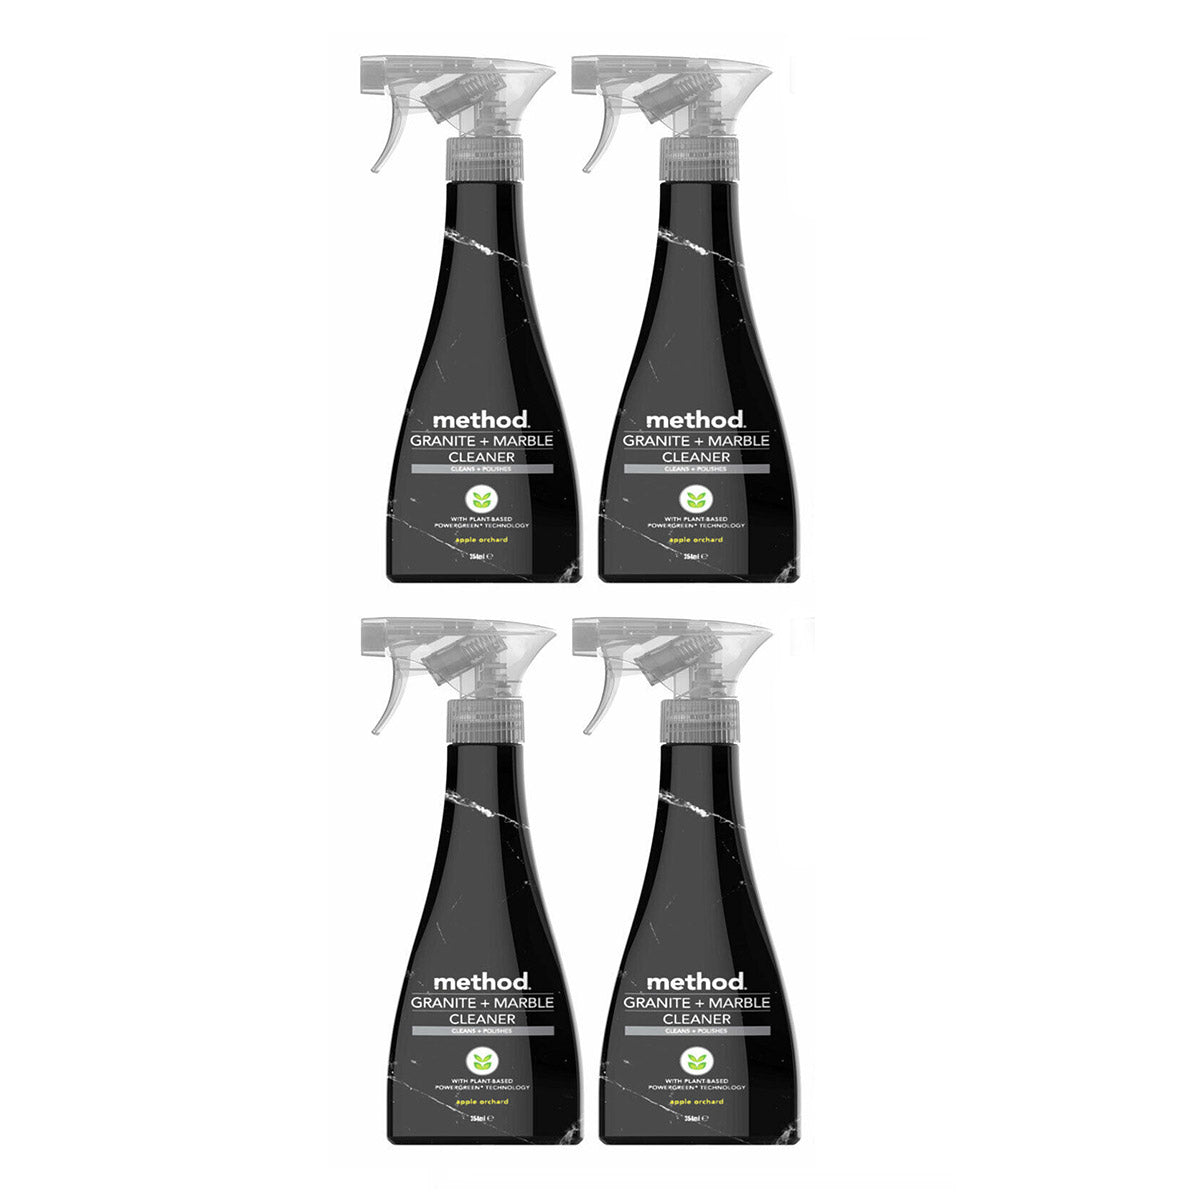 A pack of 4 of the recommended Granite & Marble Cleaner from Method which is perfect for daily cleaning of your Saarinen Marble Tulip Table